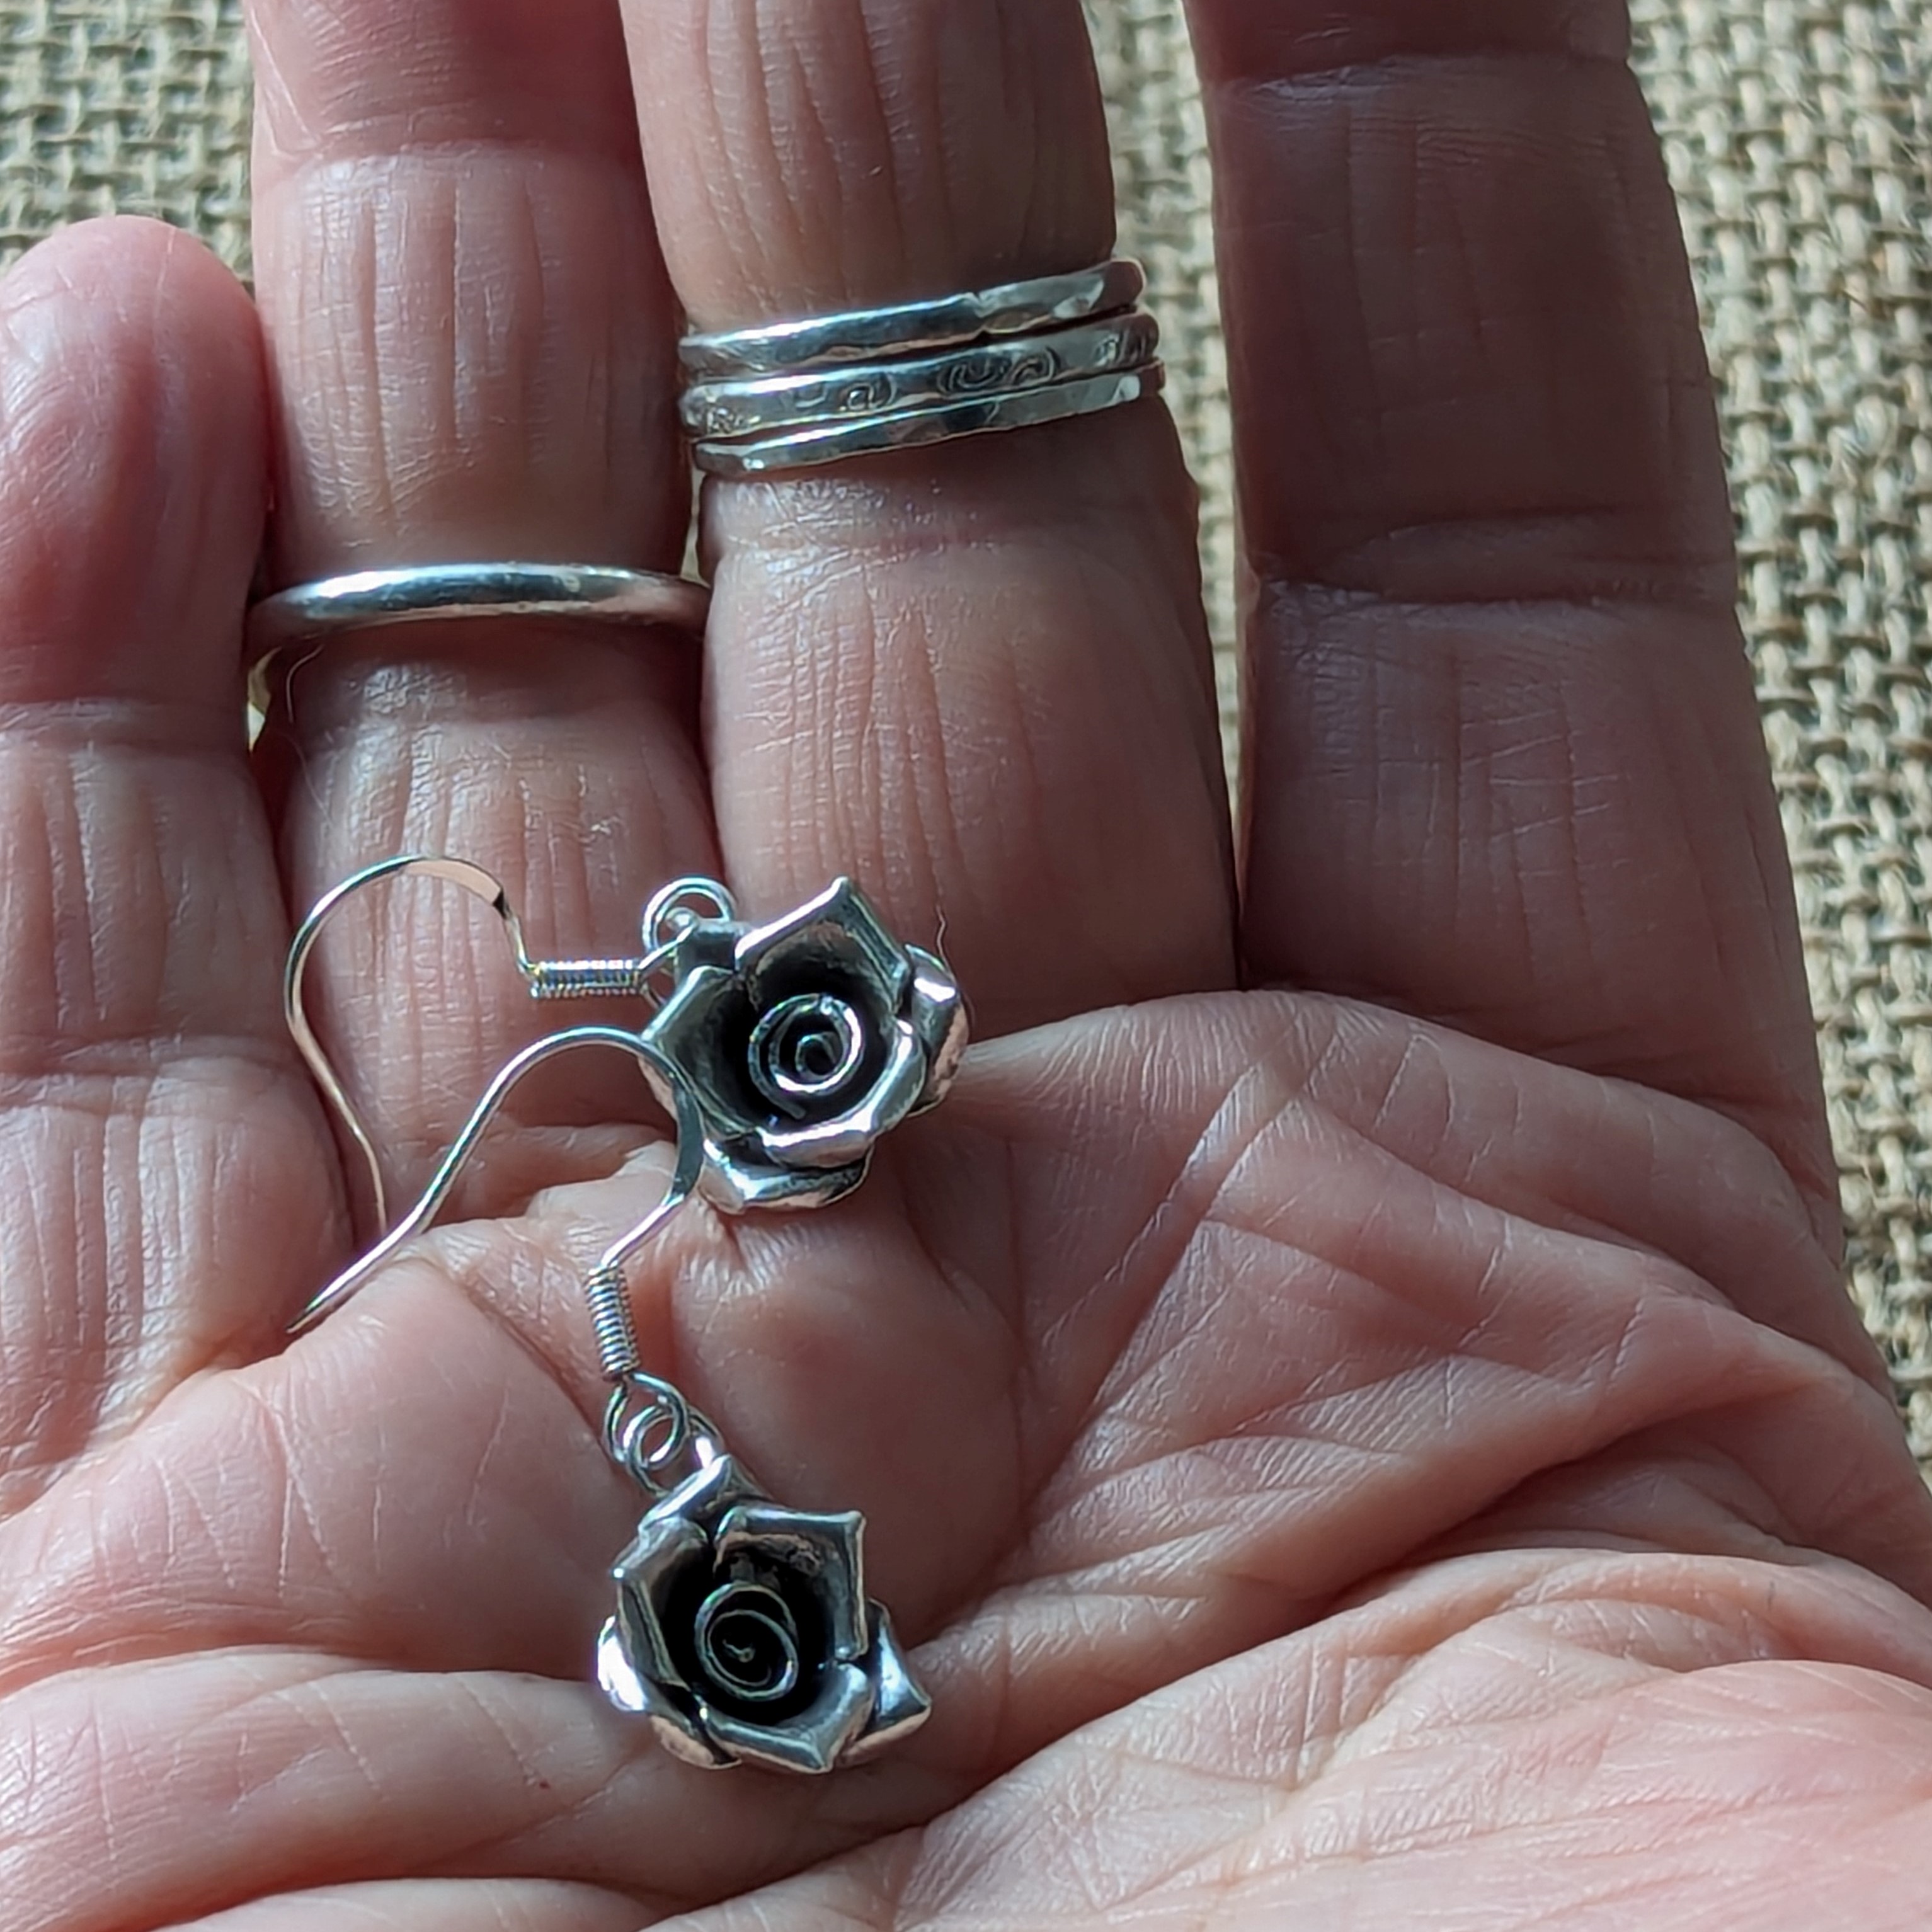 E193 Talia Rose Earrings. Rose shaped dangle drop earrings, created from recycled fine silver. Ethically created and Fair Trade.